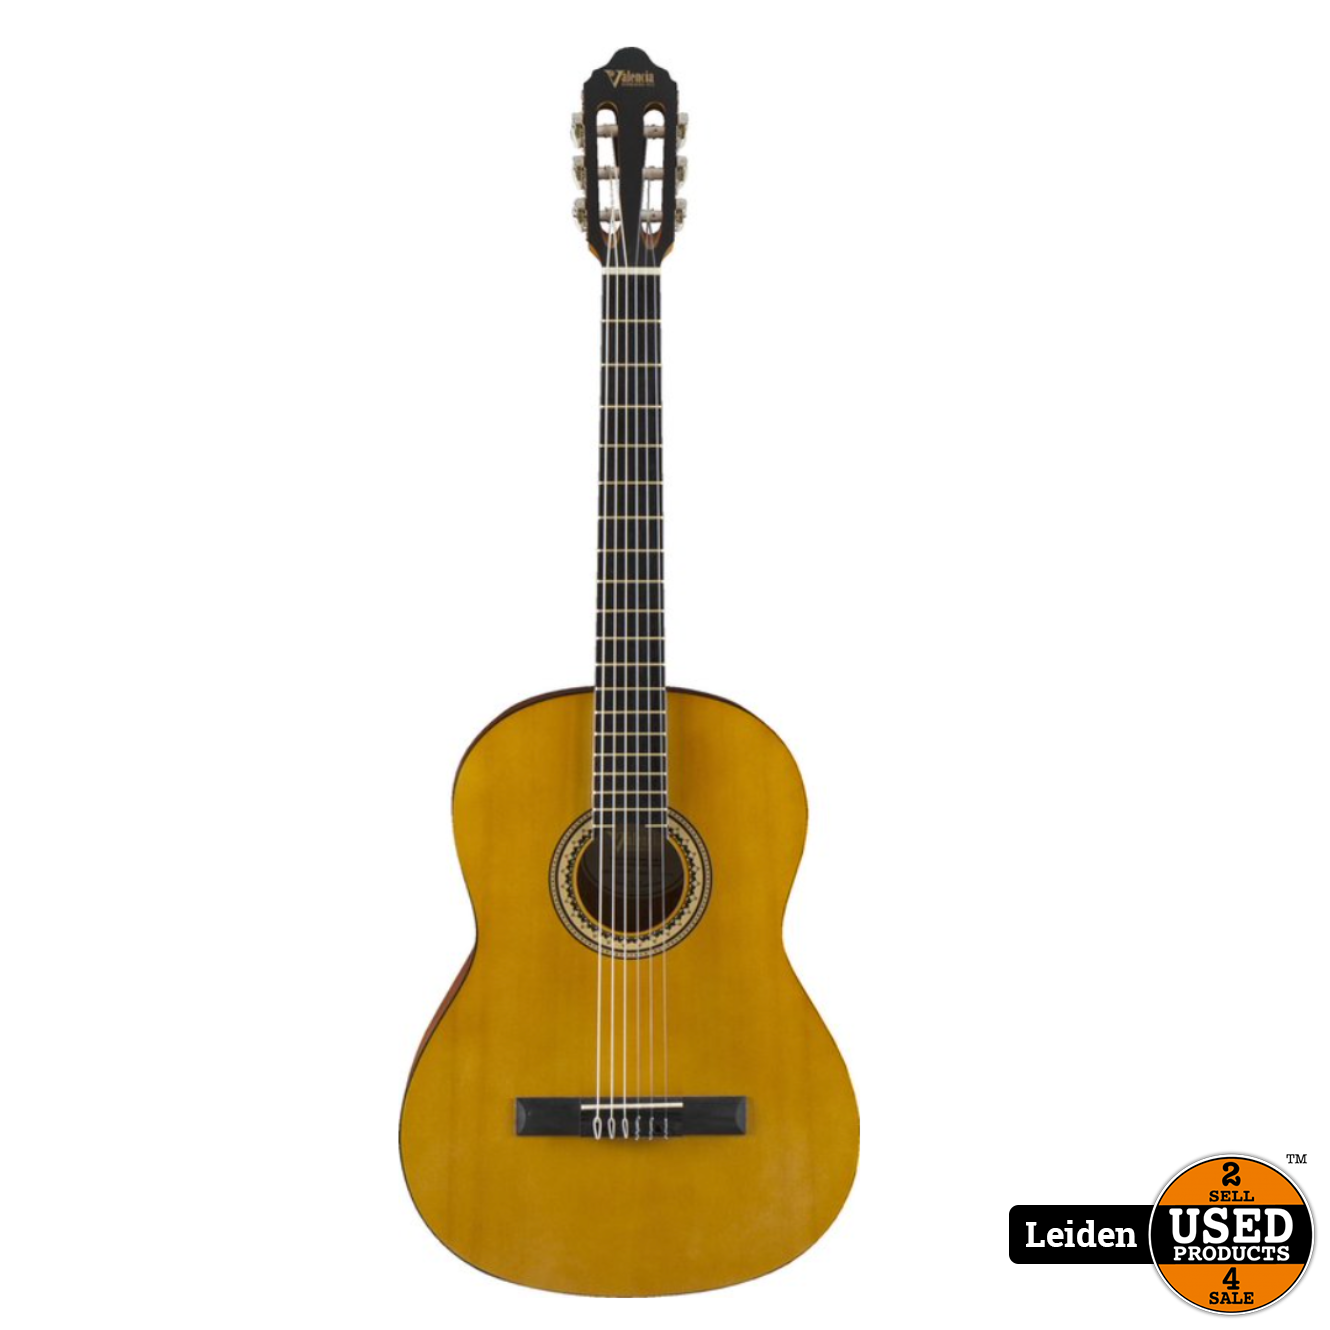 Valencia Series 200 VC-204 Gitaar Antique - Used Products Leiden